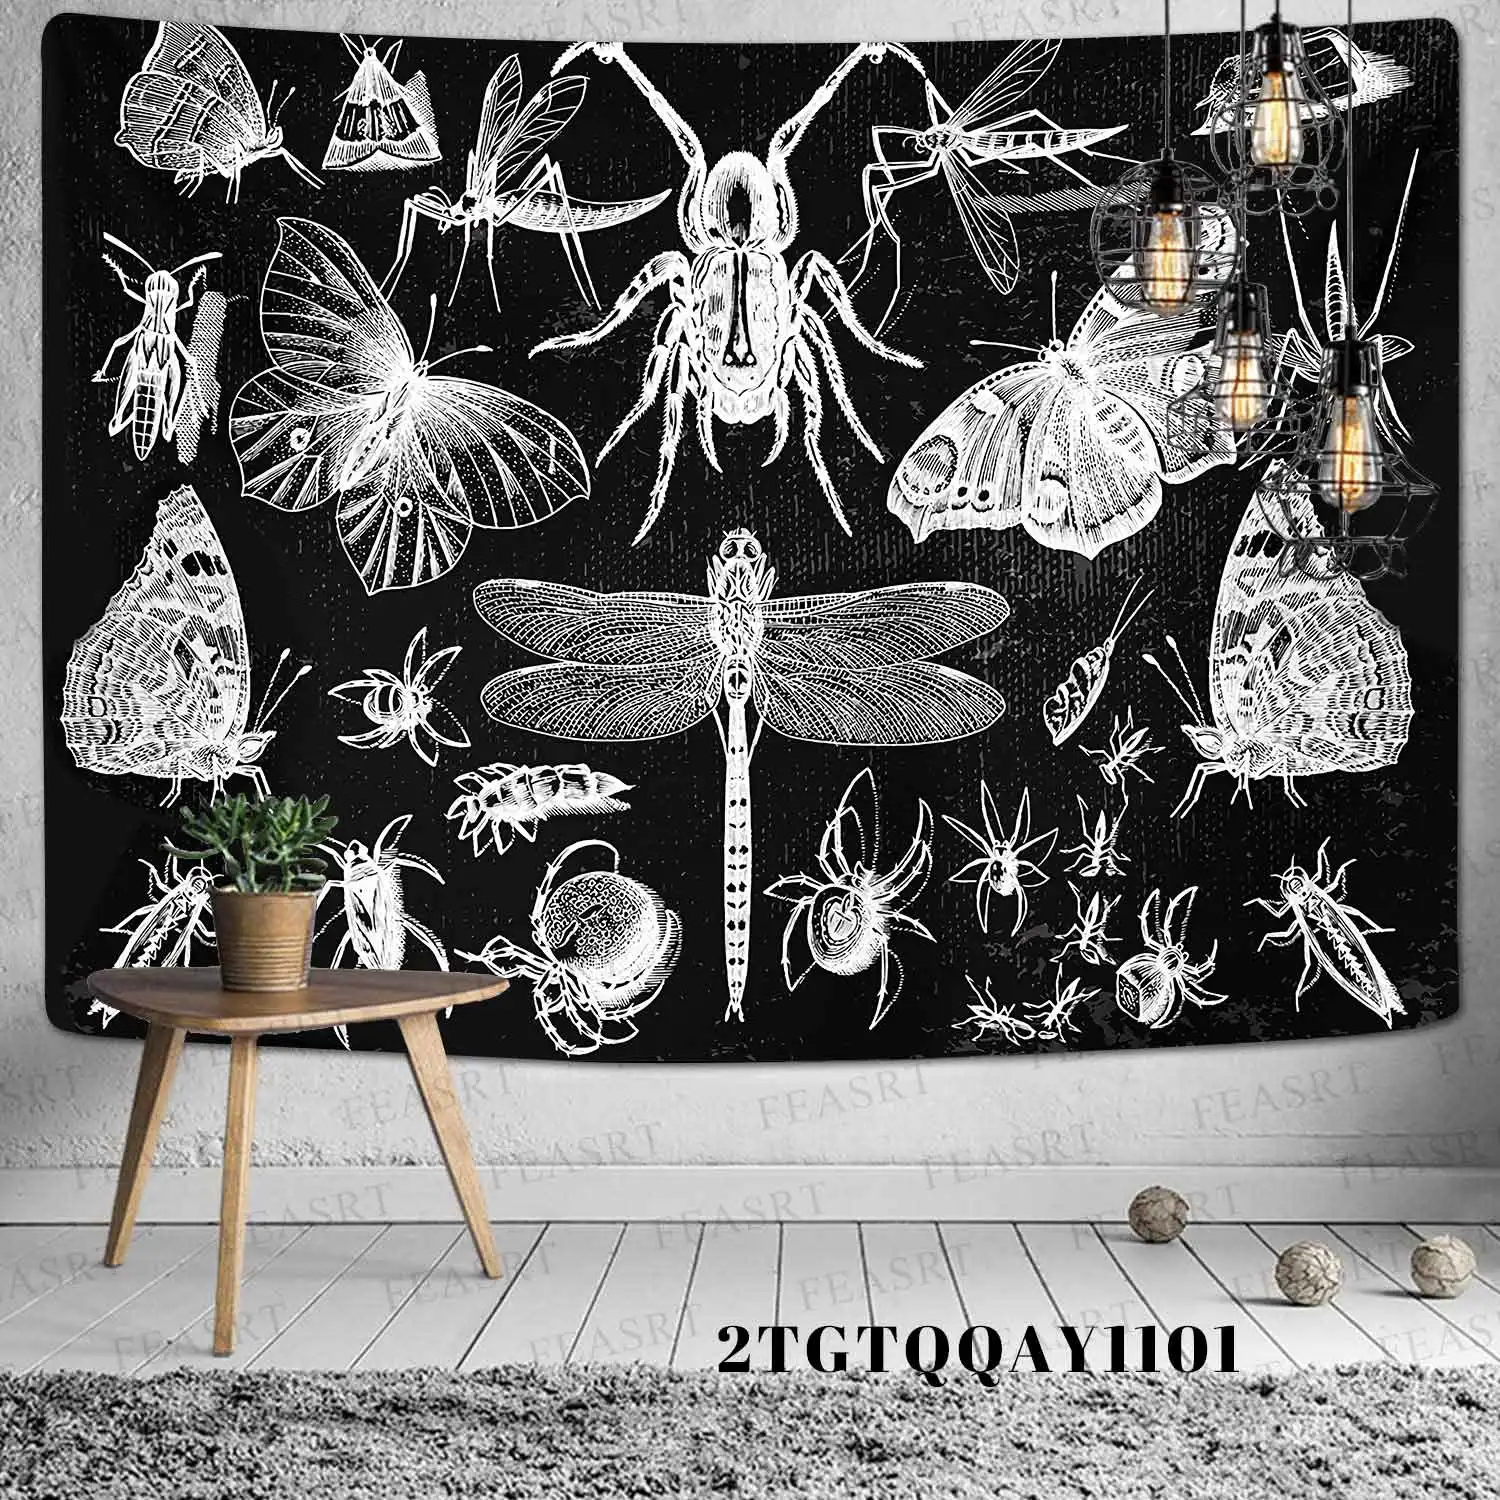 Simsant Black and White Tapestry Gothic Witchy Tapestry Moon Phase Tarot Tapestry Fantasy Gothic Skull Hawk Moth Wall for Dorm